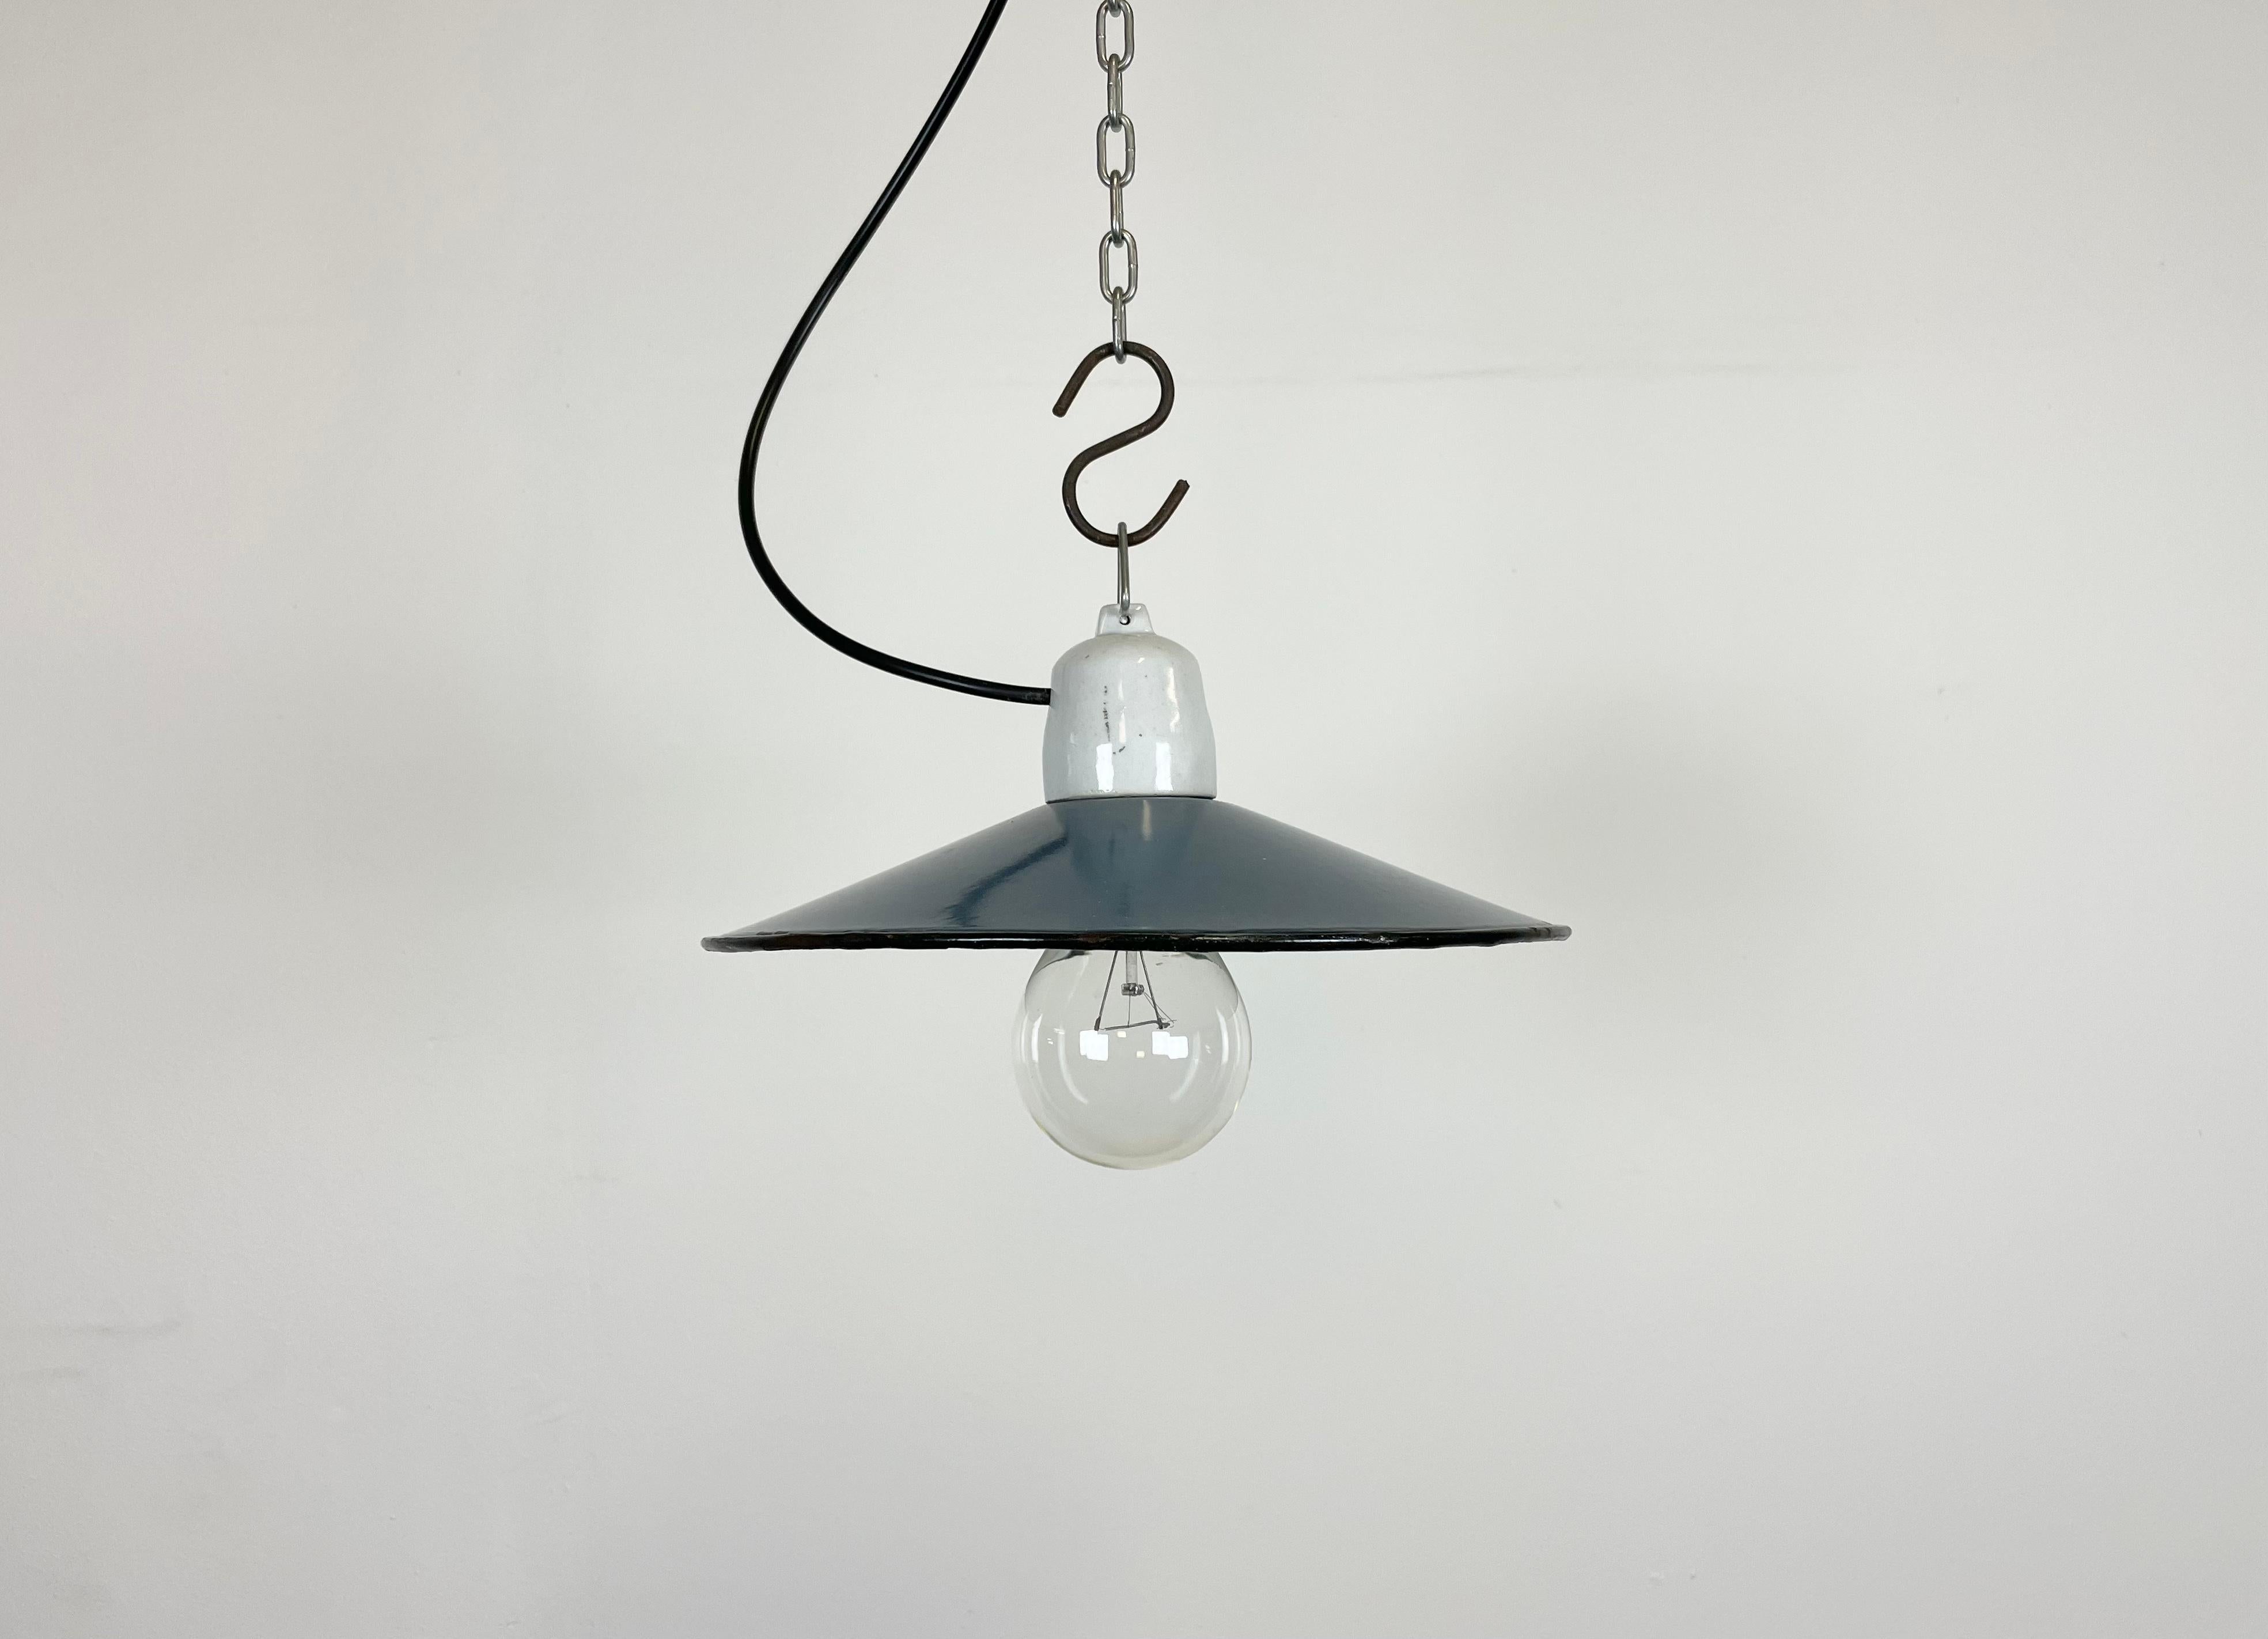 Vintage industrial enamel pendant lamp made in Poland during the 1970s. It features a blue enamel shade with white enamel interior and porcelain top. The socket requires E 27 light bulbs. The weight of the lamp is 0,5 kg. New wire.